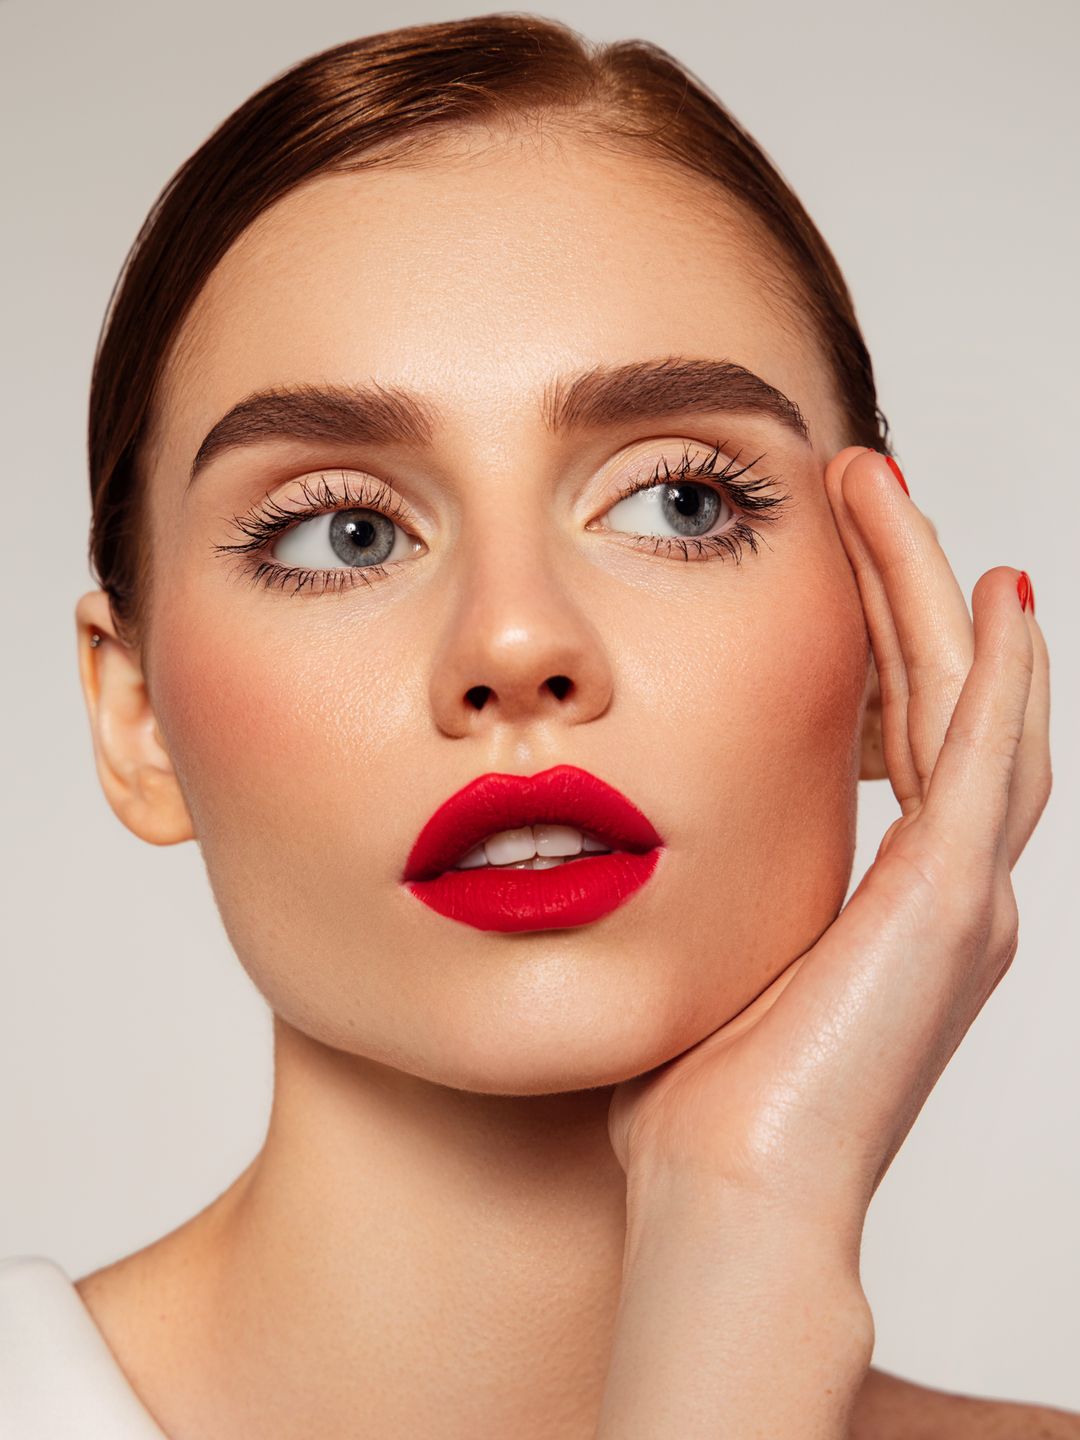 Model with curly eyelashes and red lipstick 